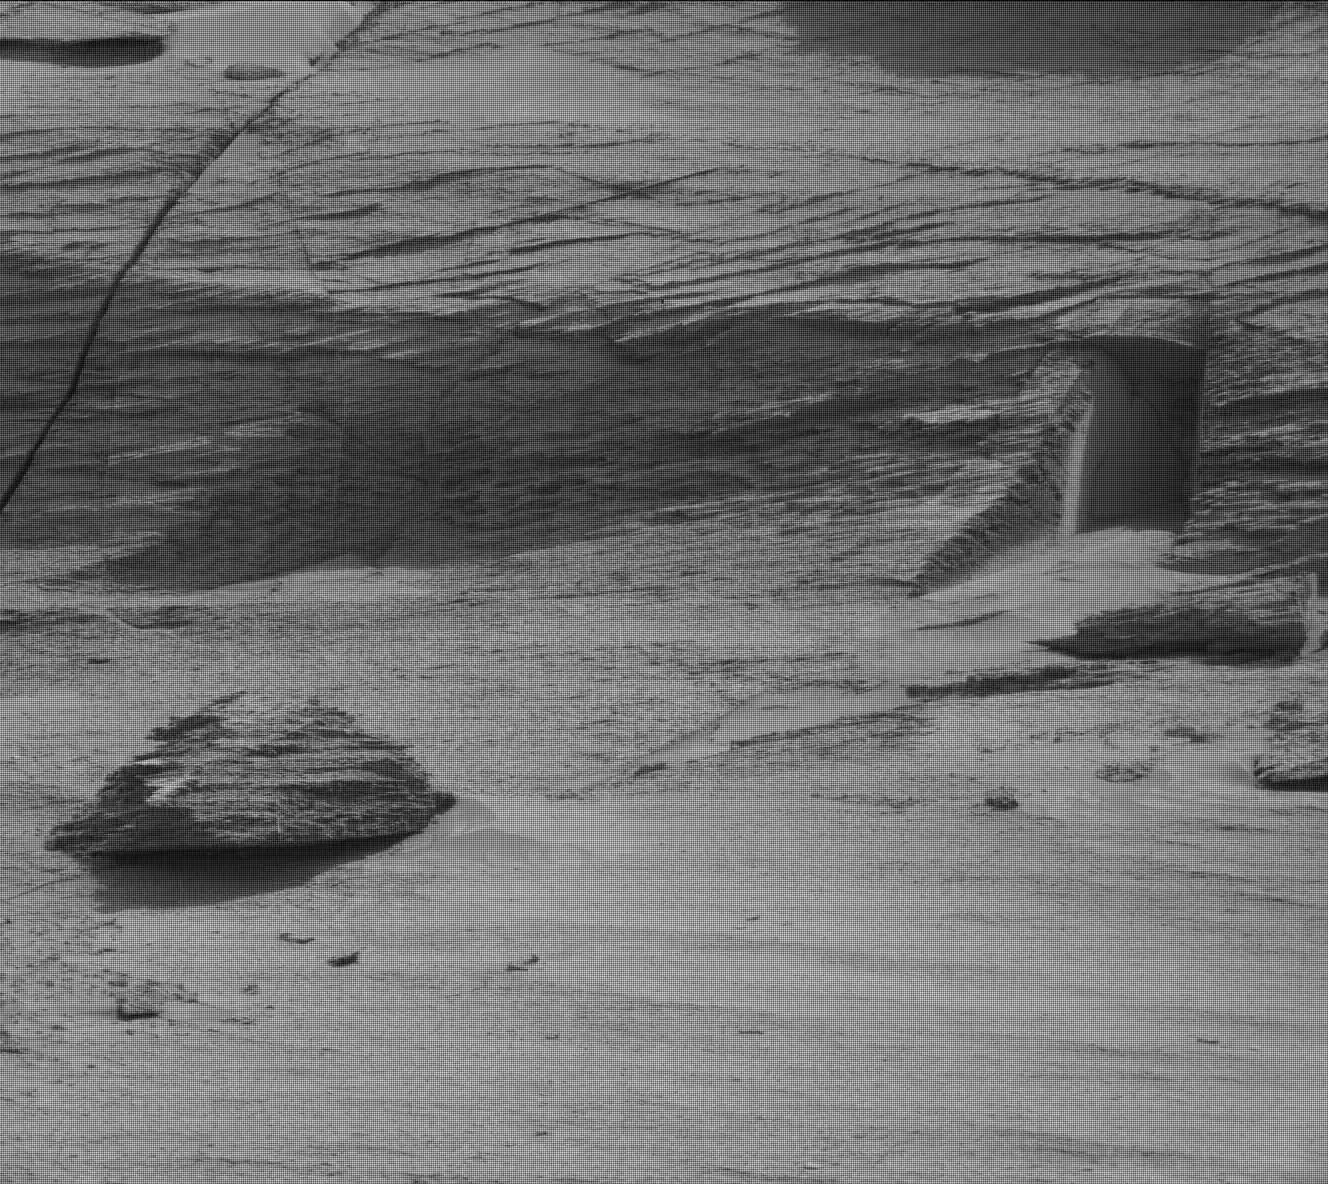 Sol 3466: An entrance to a secret underground tunnel has been found on Mars 2